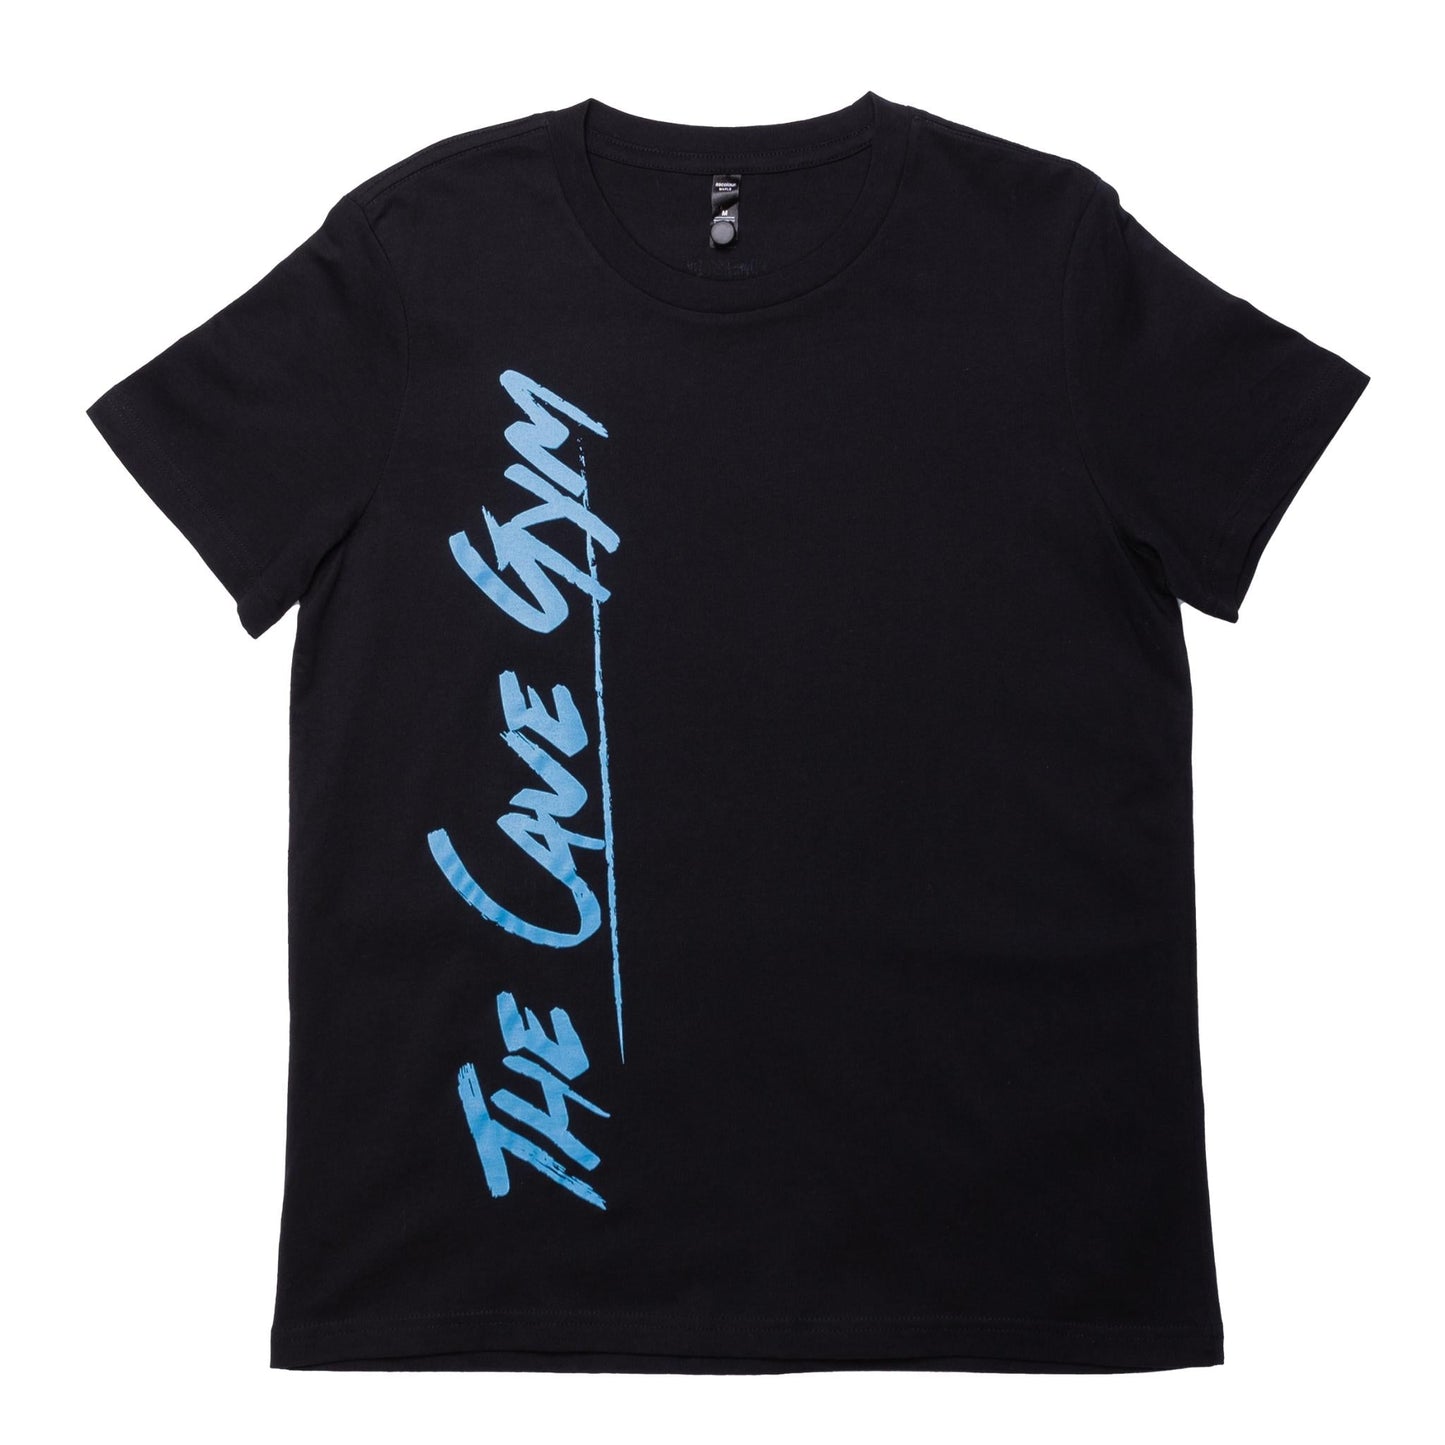 Cave Gym Women's Maple T-Shirt Black - Merchandise - X-Small - The Cave Gym